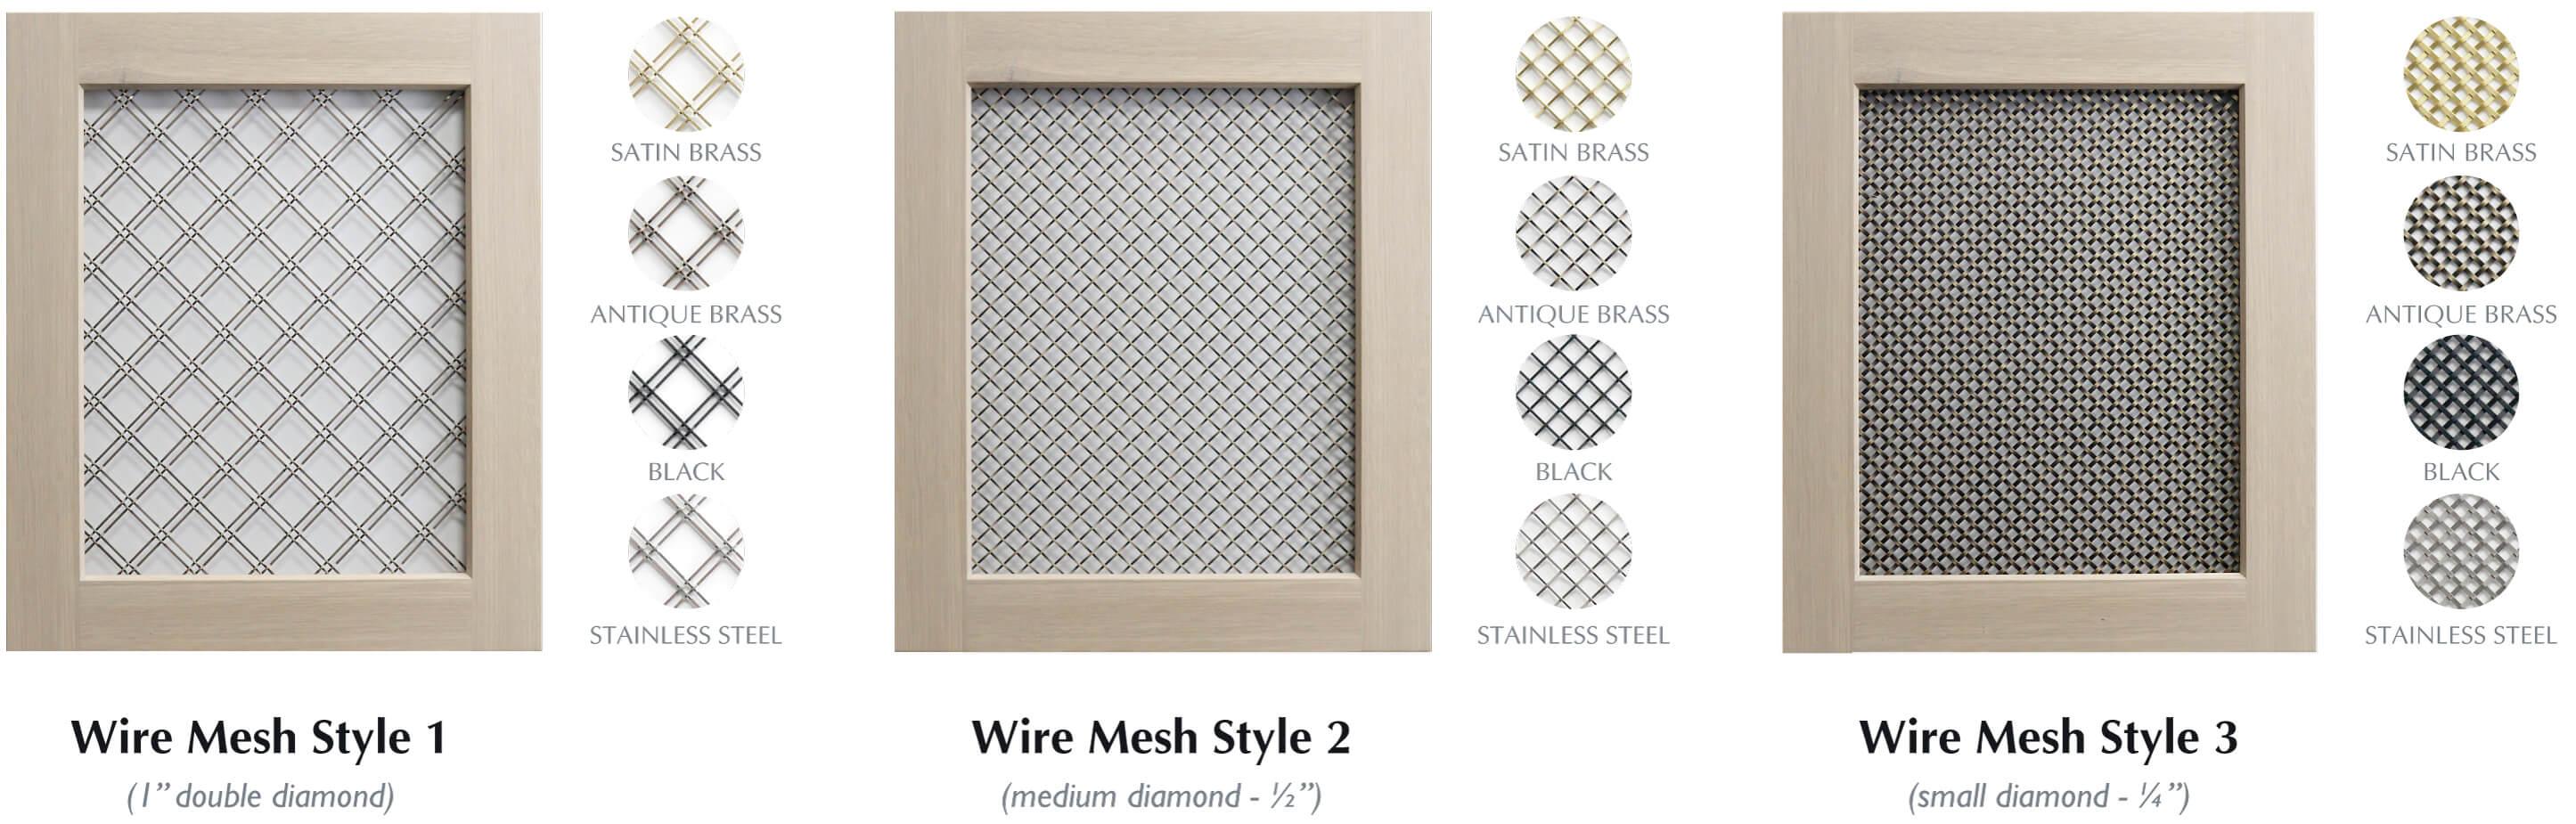 Dura Supreme Cabinetry's Collection of Wire Mesh Insert Styles and Finishes.